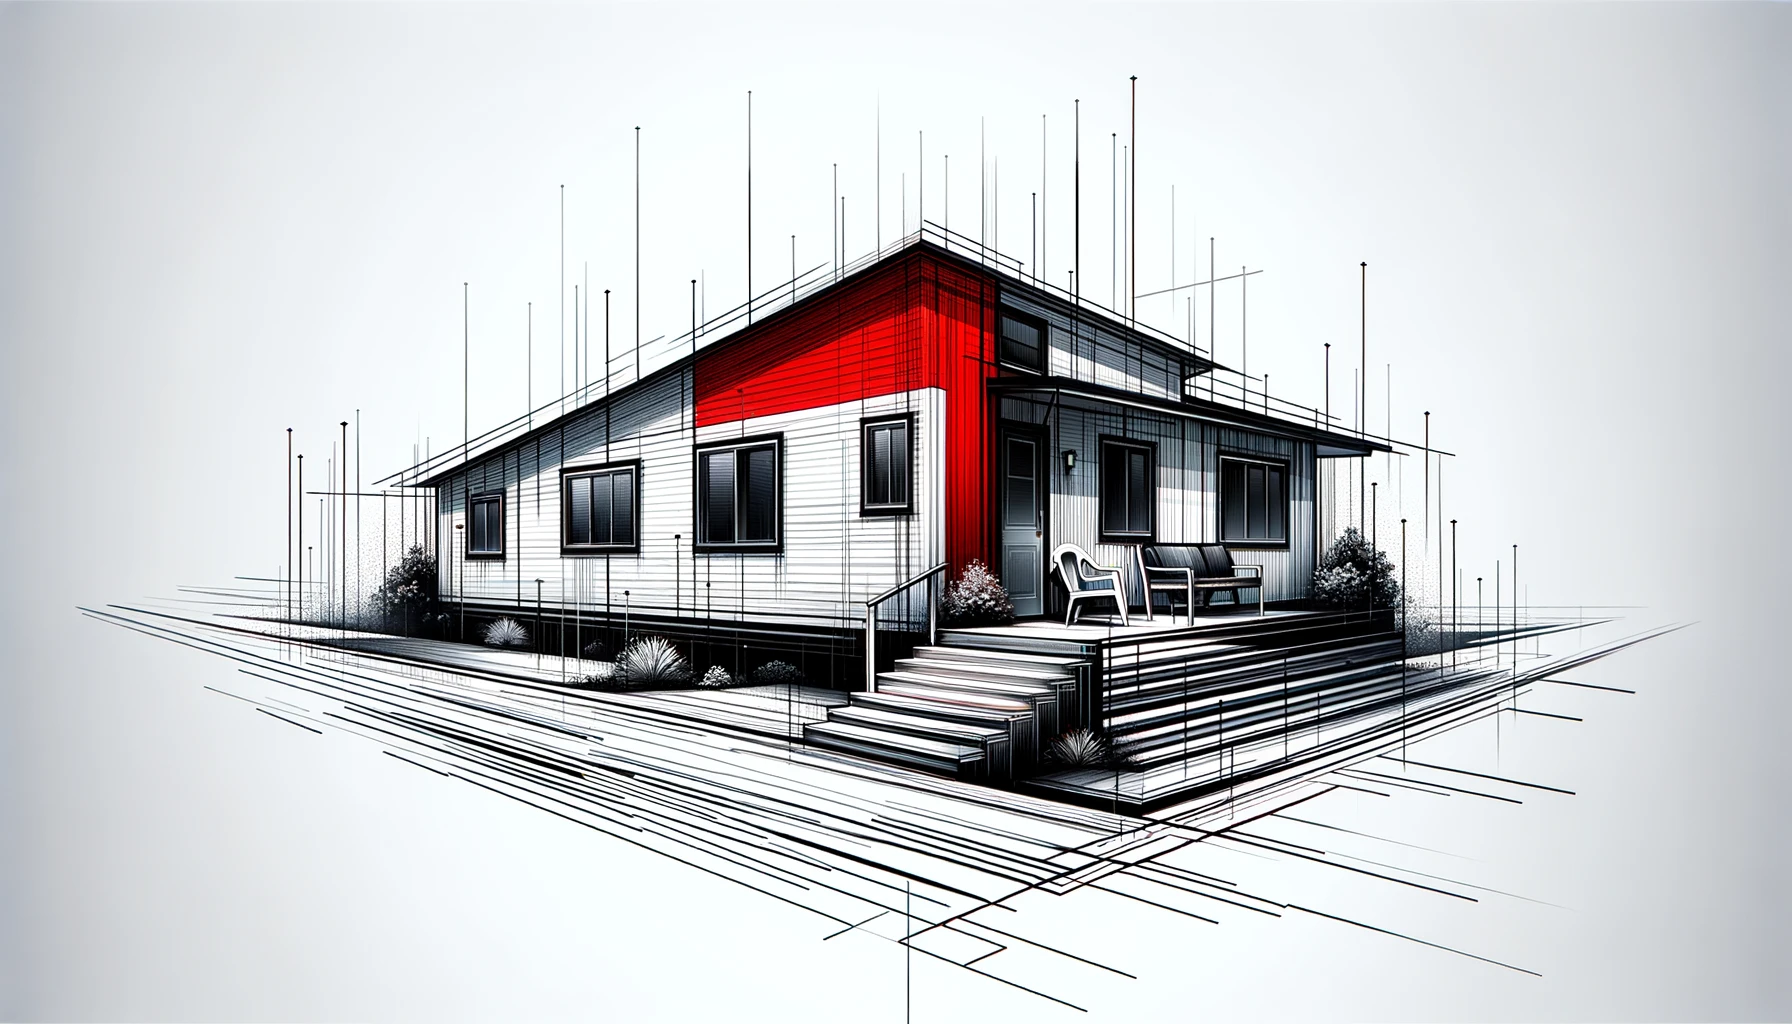 Abstract representation of a manufactured home, with bold black and red lines on a white background, symbolizing modern prefabricated living.